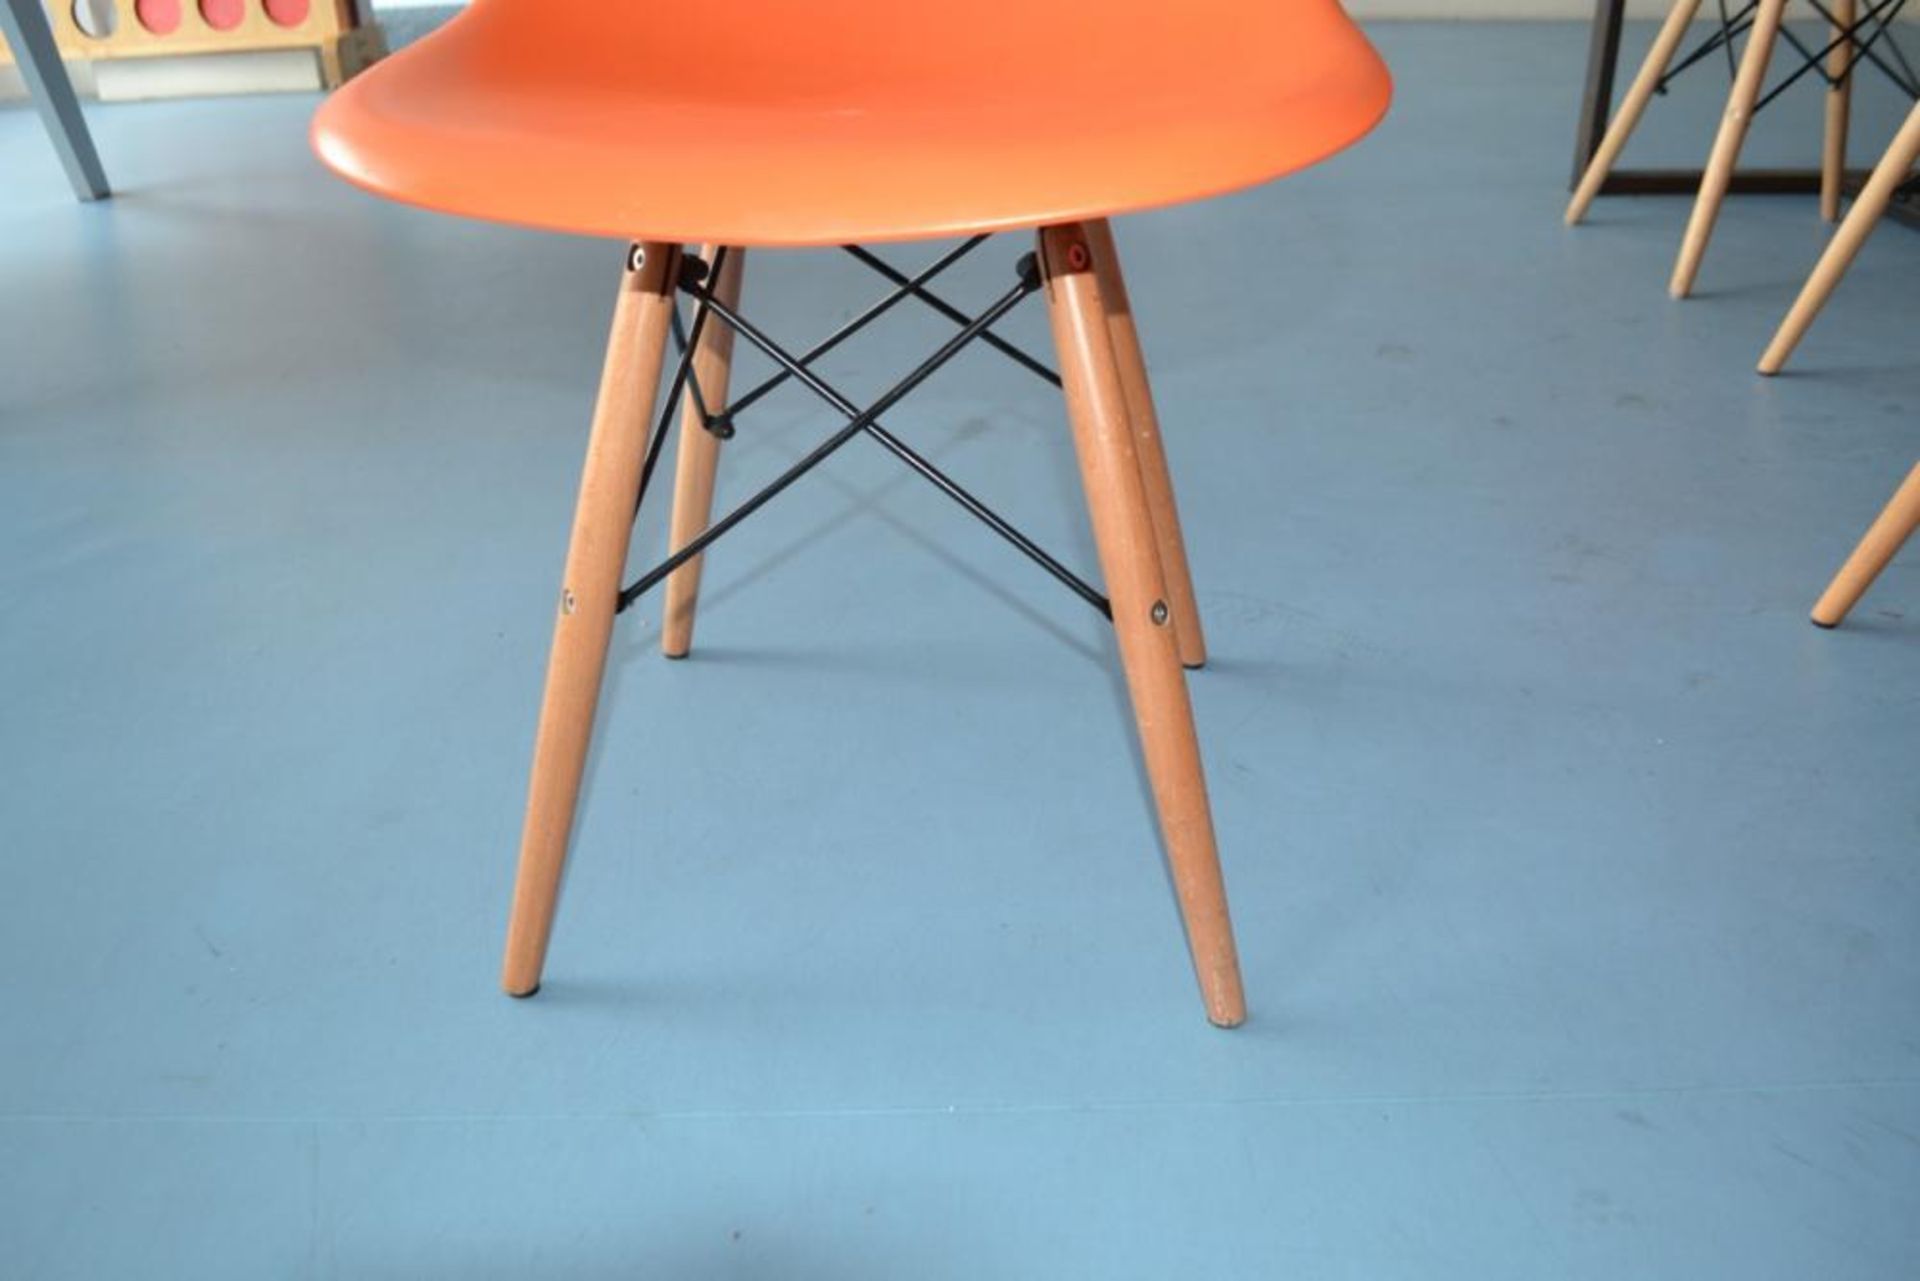 12 x Children's Orange and Red Charles and Ray Eames Style Shell Chairs - CL425 - Location: Altrinch - Image 8 of 9